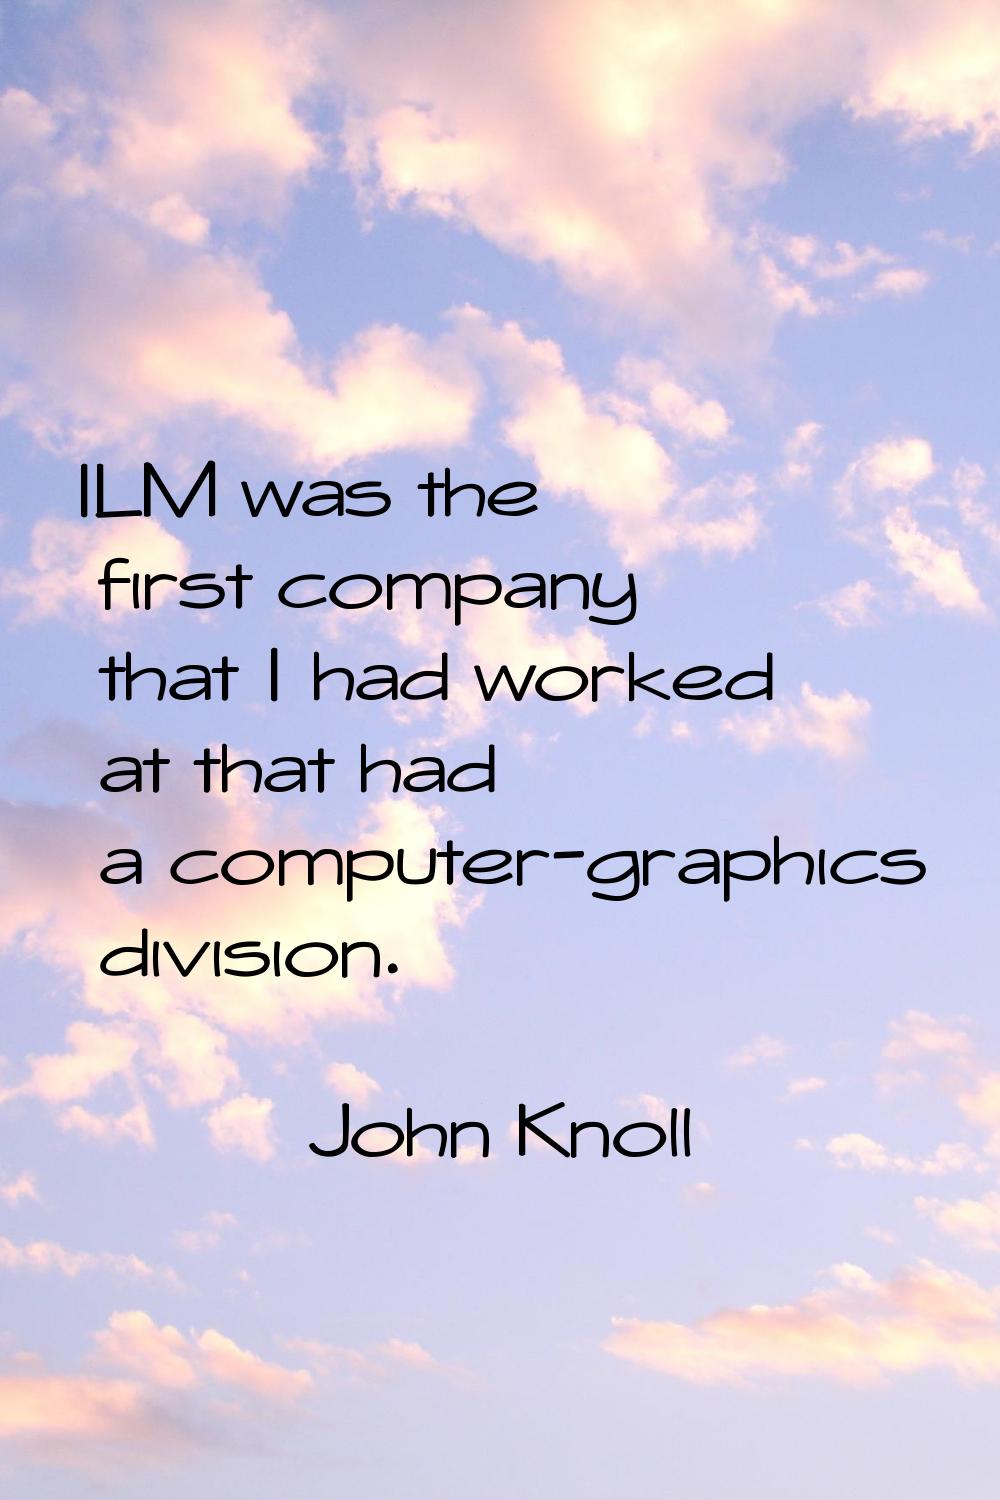 ILM was the first company that I had worked at that had a computer-graphics division.